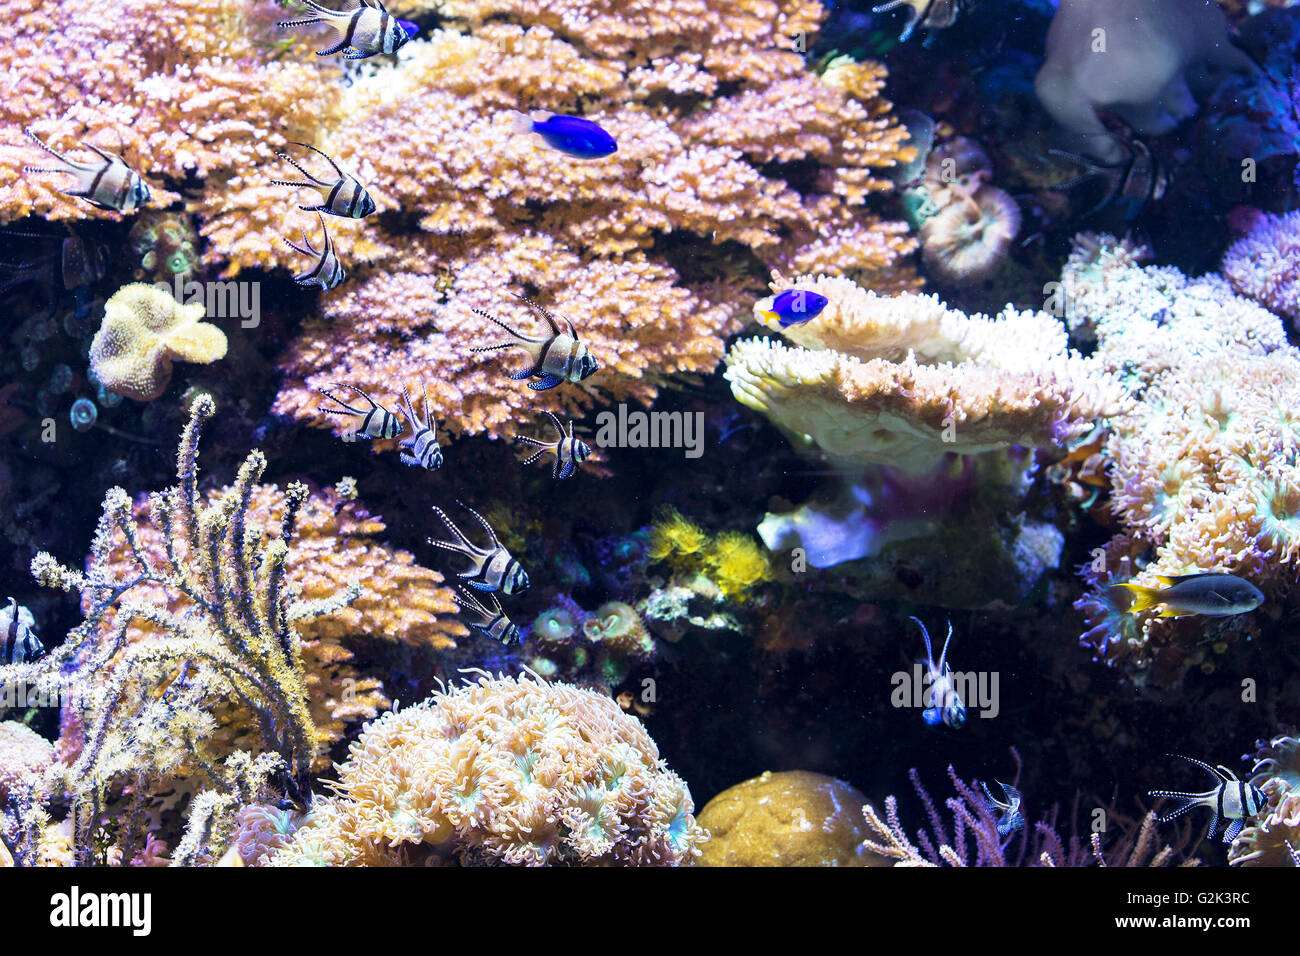 Several fishes swimming between sea grass and corals Stock Photo